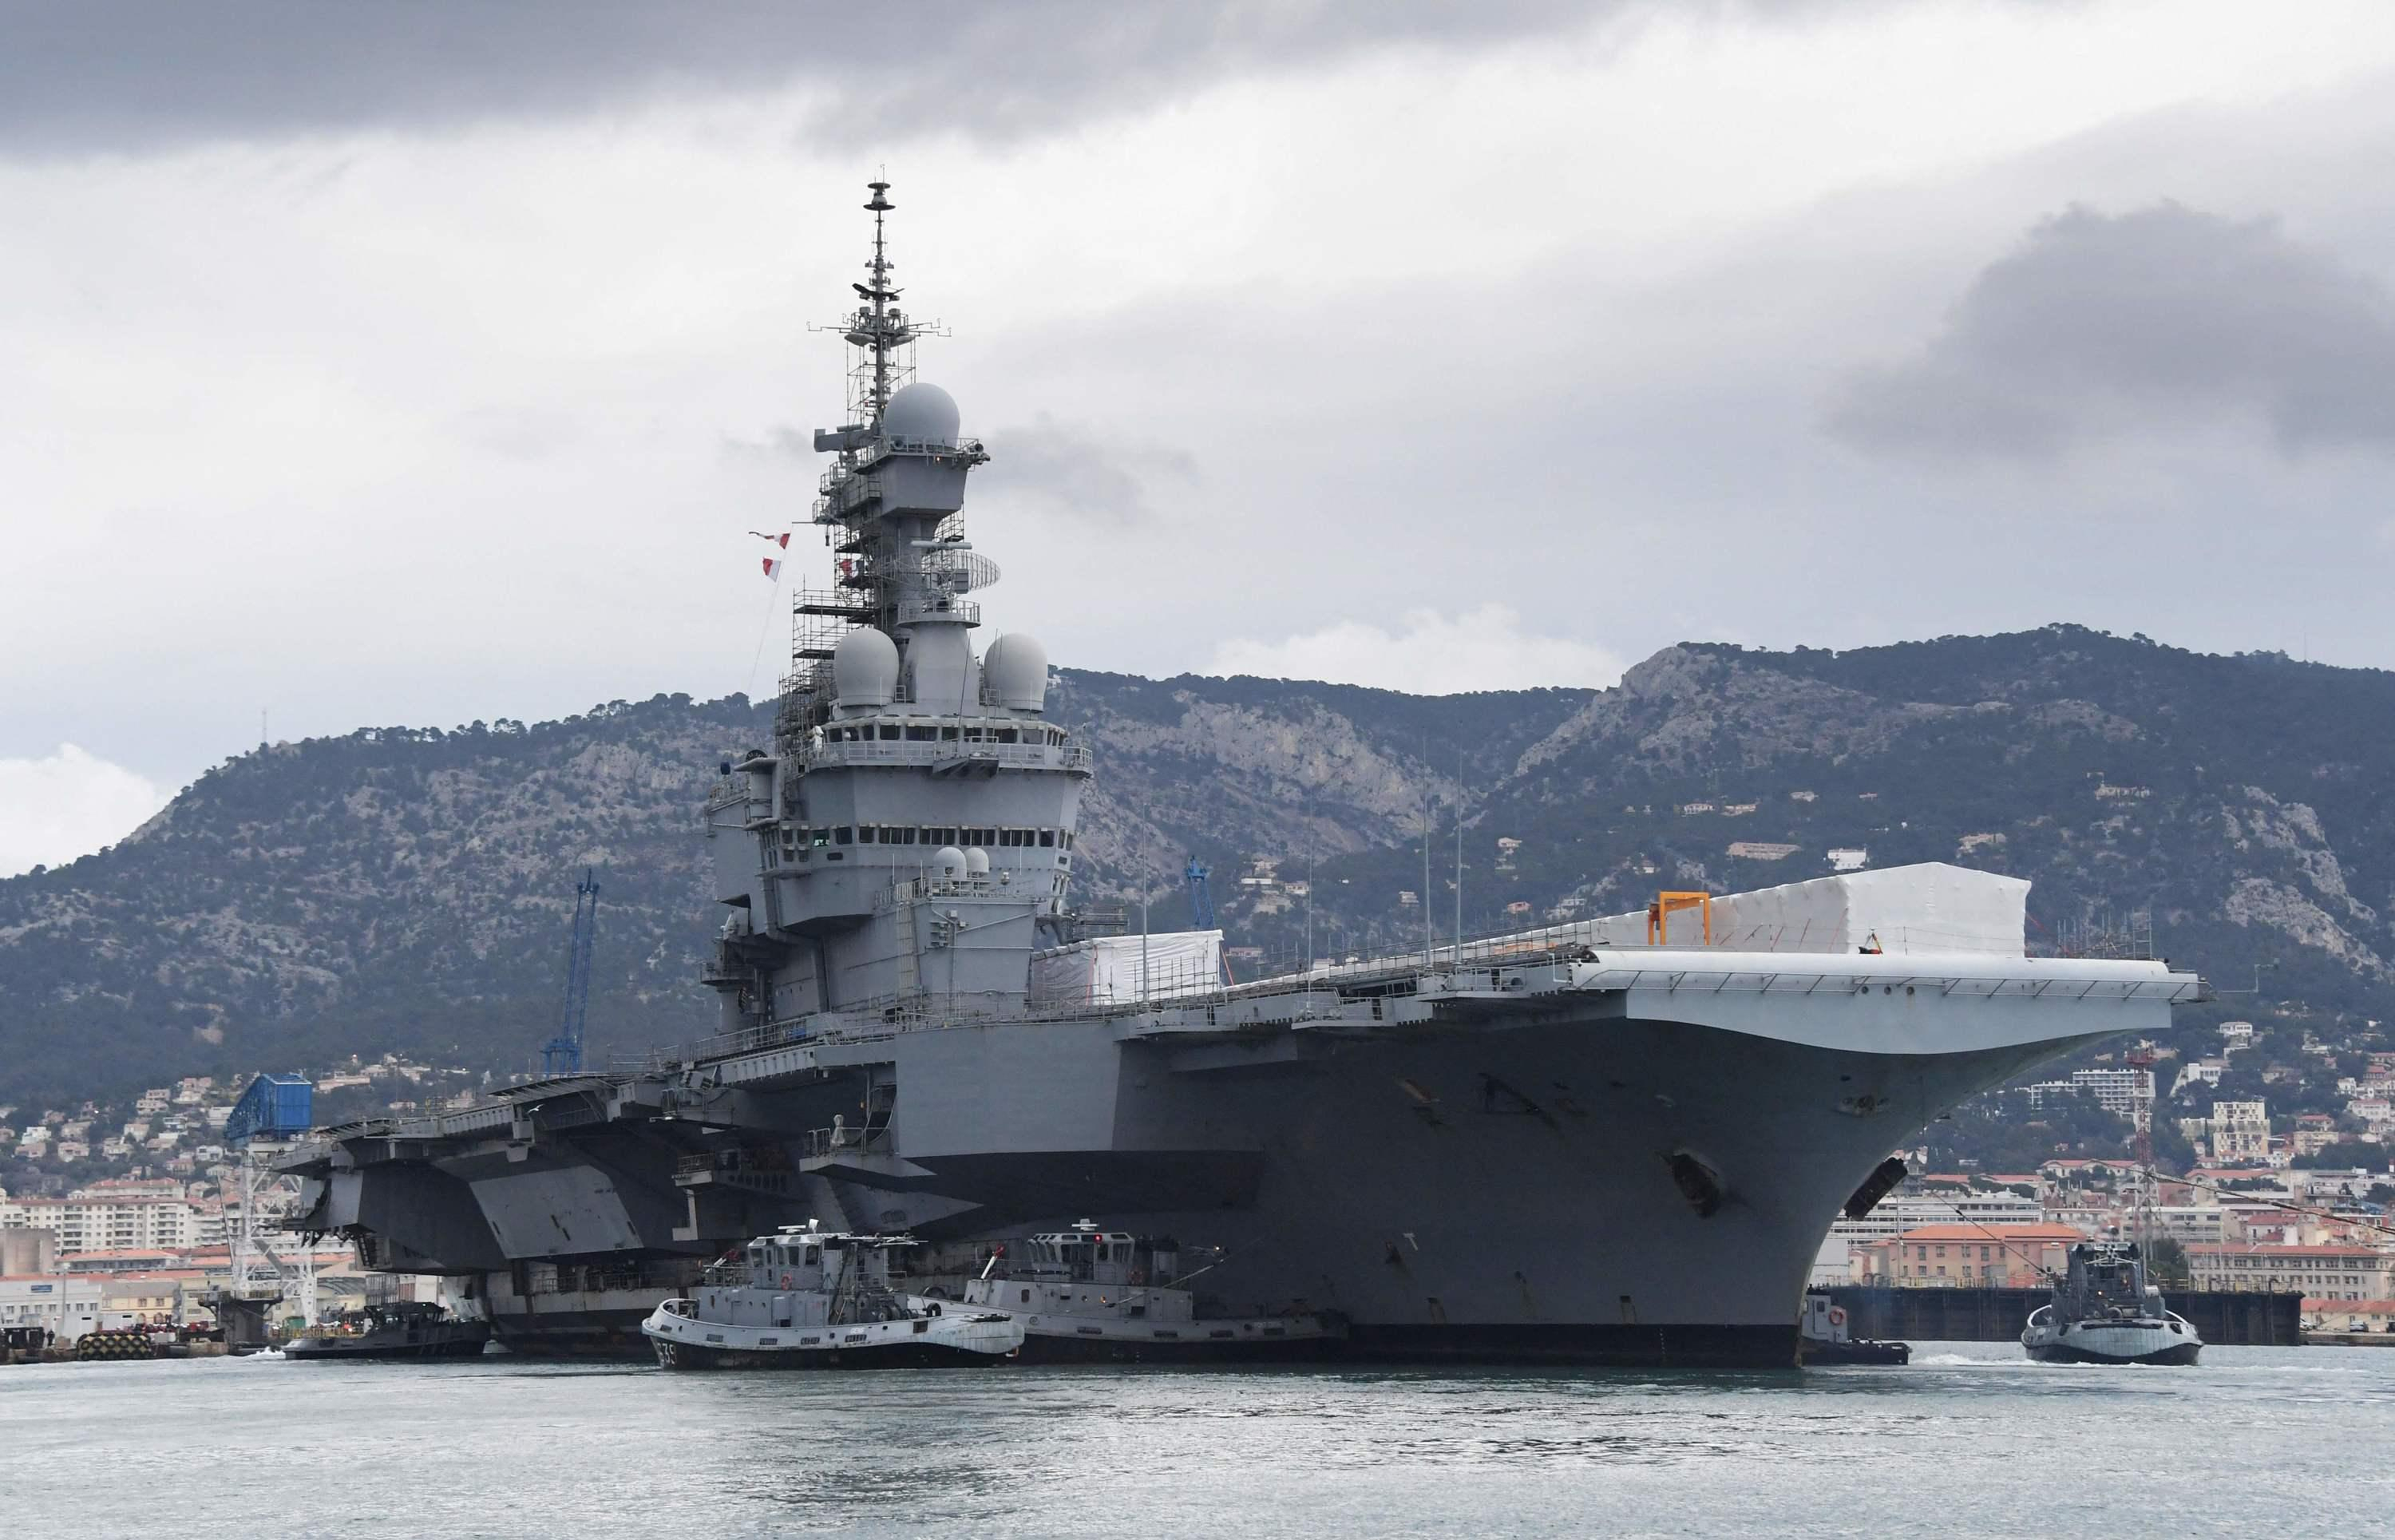 What is Akila, the mission in which the Charles de Gaulle is participating under NATO command?